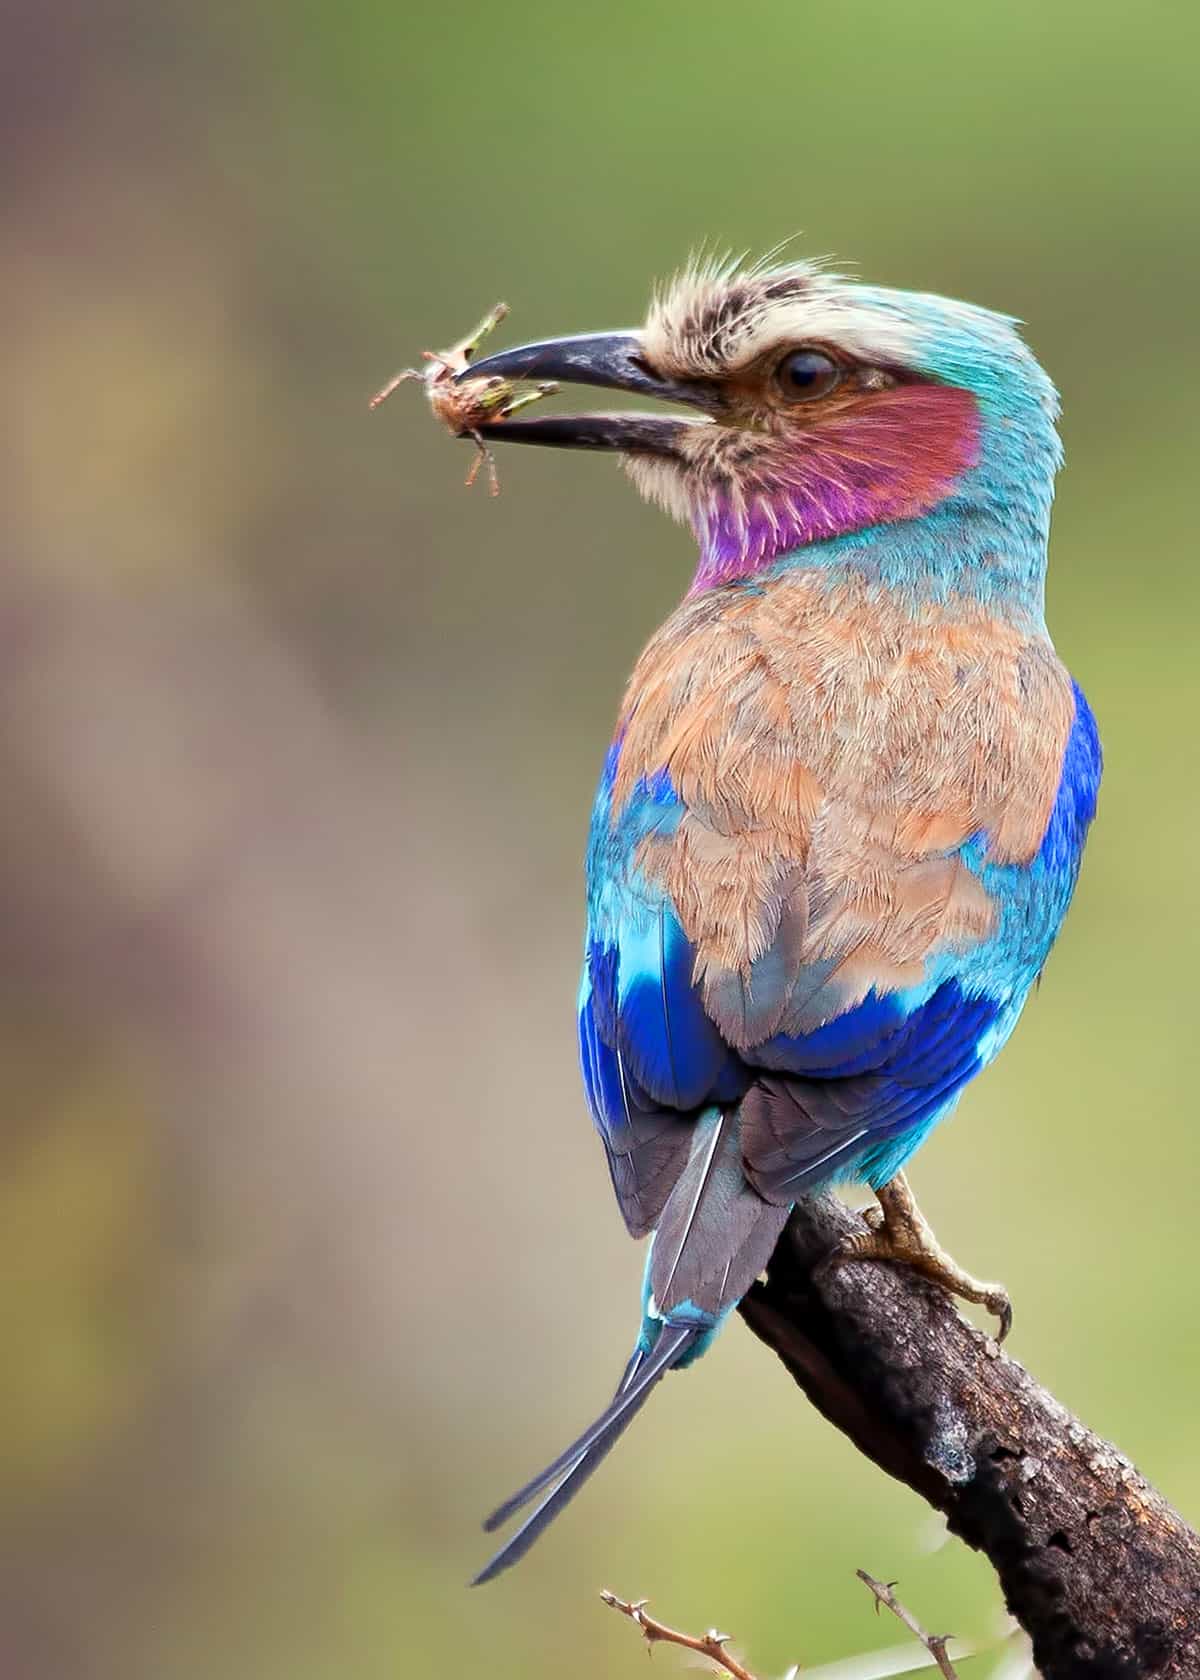 Lilac breasted roller diet